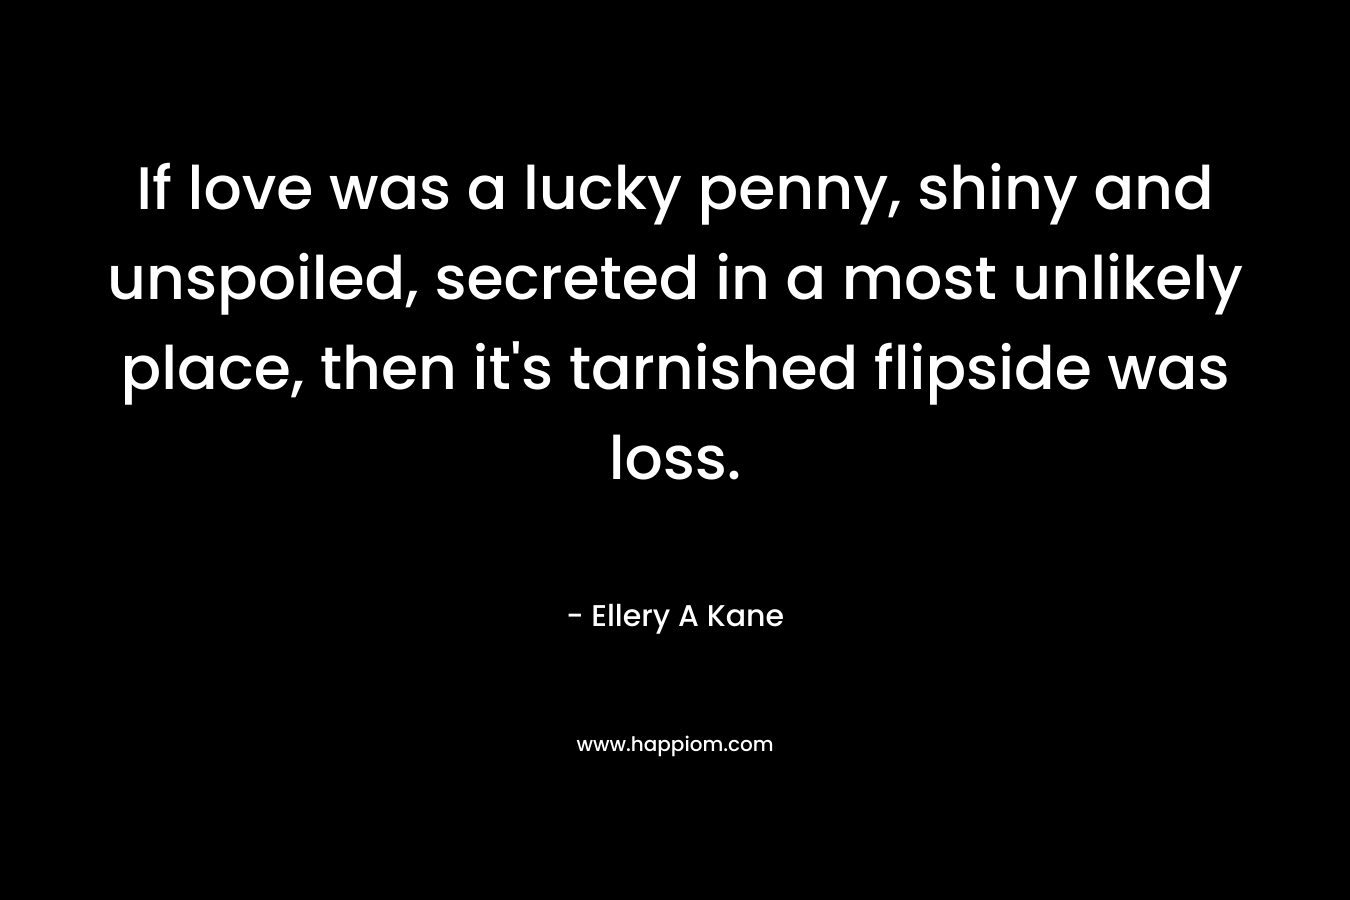 If love was a lucky penny, shiny and unspoiled, secreted in a most unlikely place, then it’s tarnished flipside was loss. – Ellery A Kane